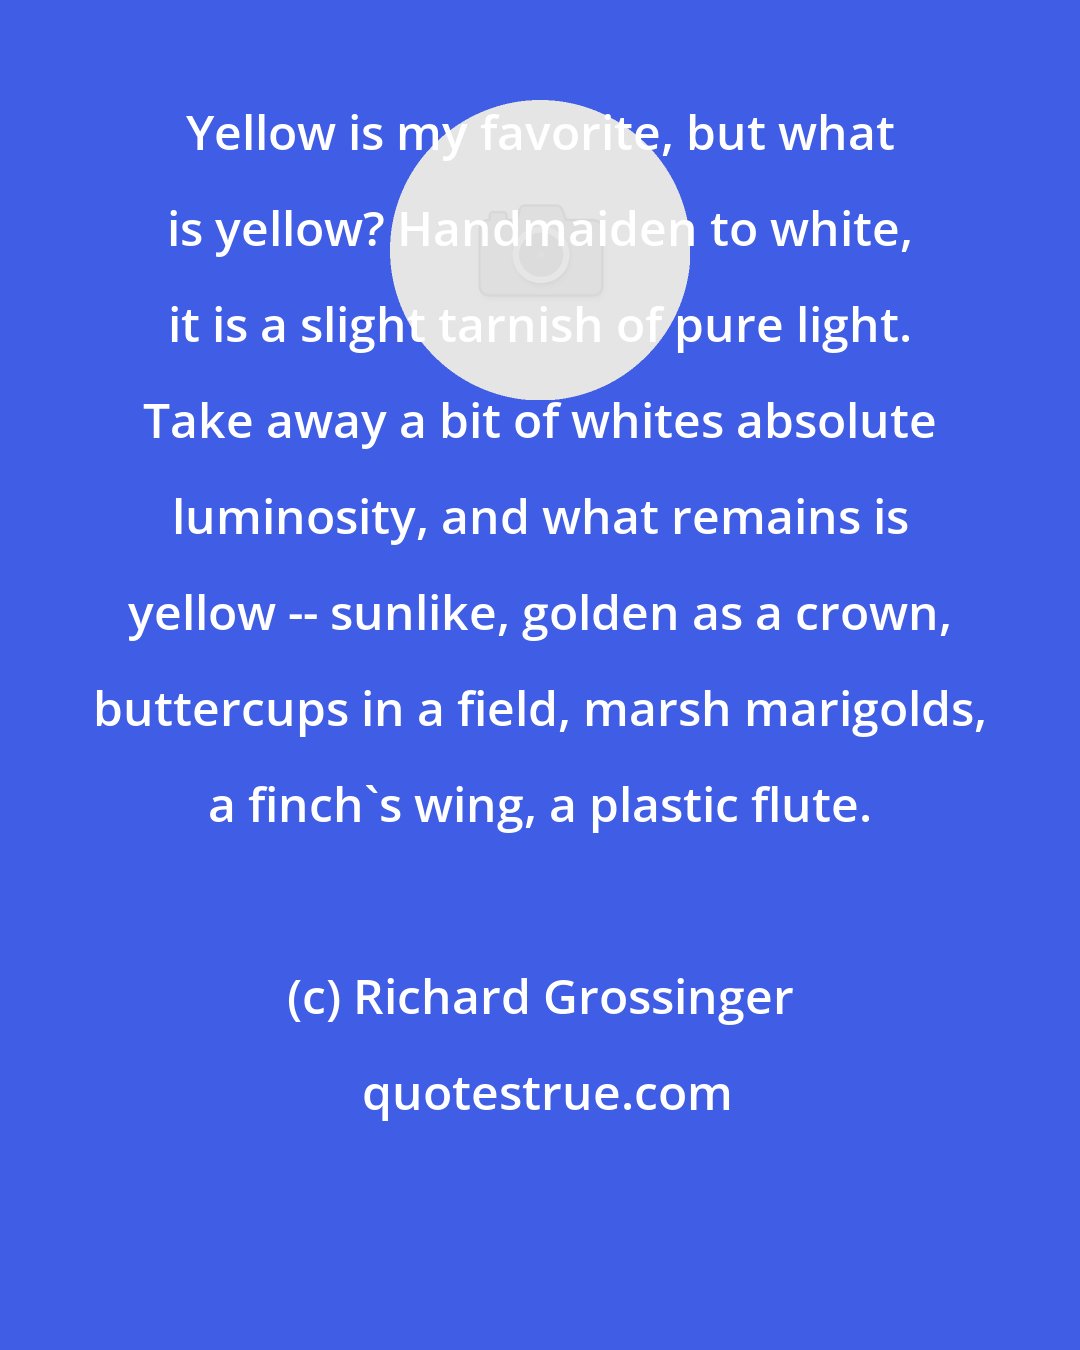 Richard Grossinger: Yellow is my favorite, but what is yellow? Handmaiden to white, it is a slight tarnish of pure light. Take away a bit of whites absolute luminosity, and what remains is yellow -- sunlike, golden as a crown, buttercups in a field, marsh marigolds, a finch's wing, a plastic flute.